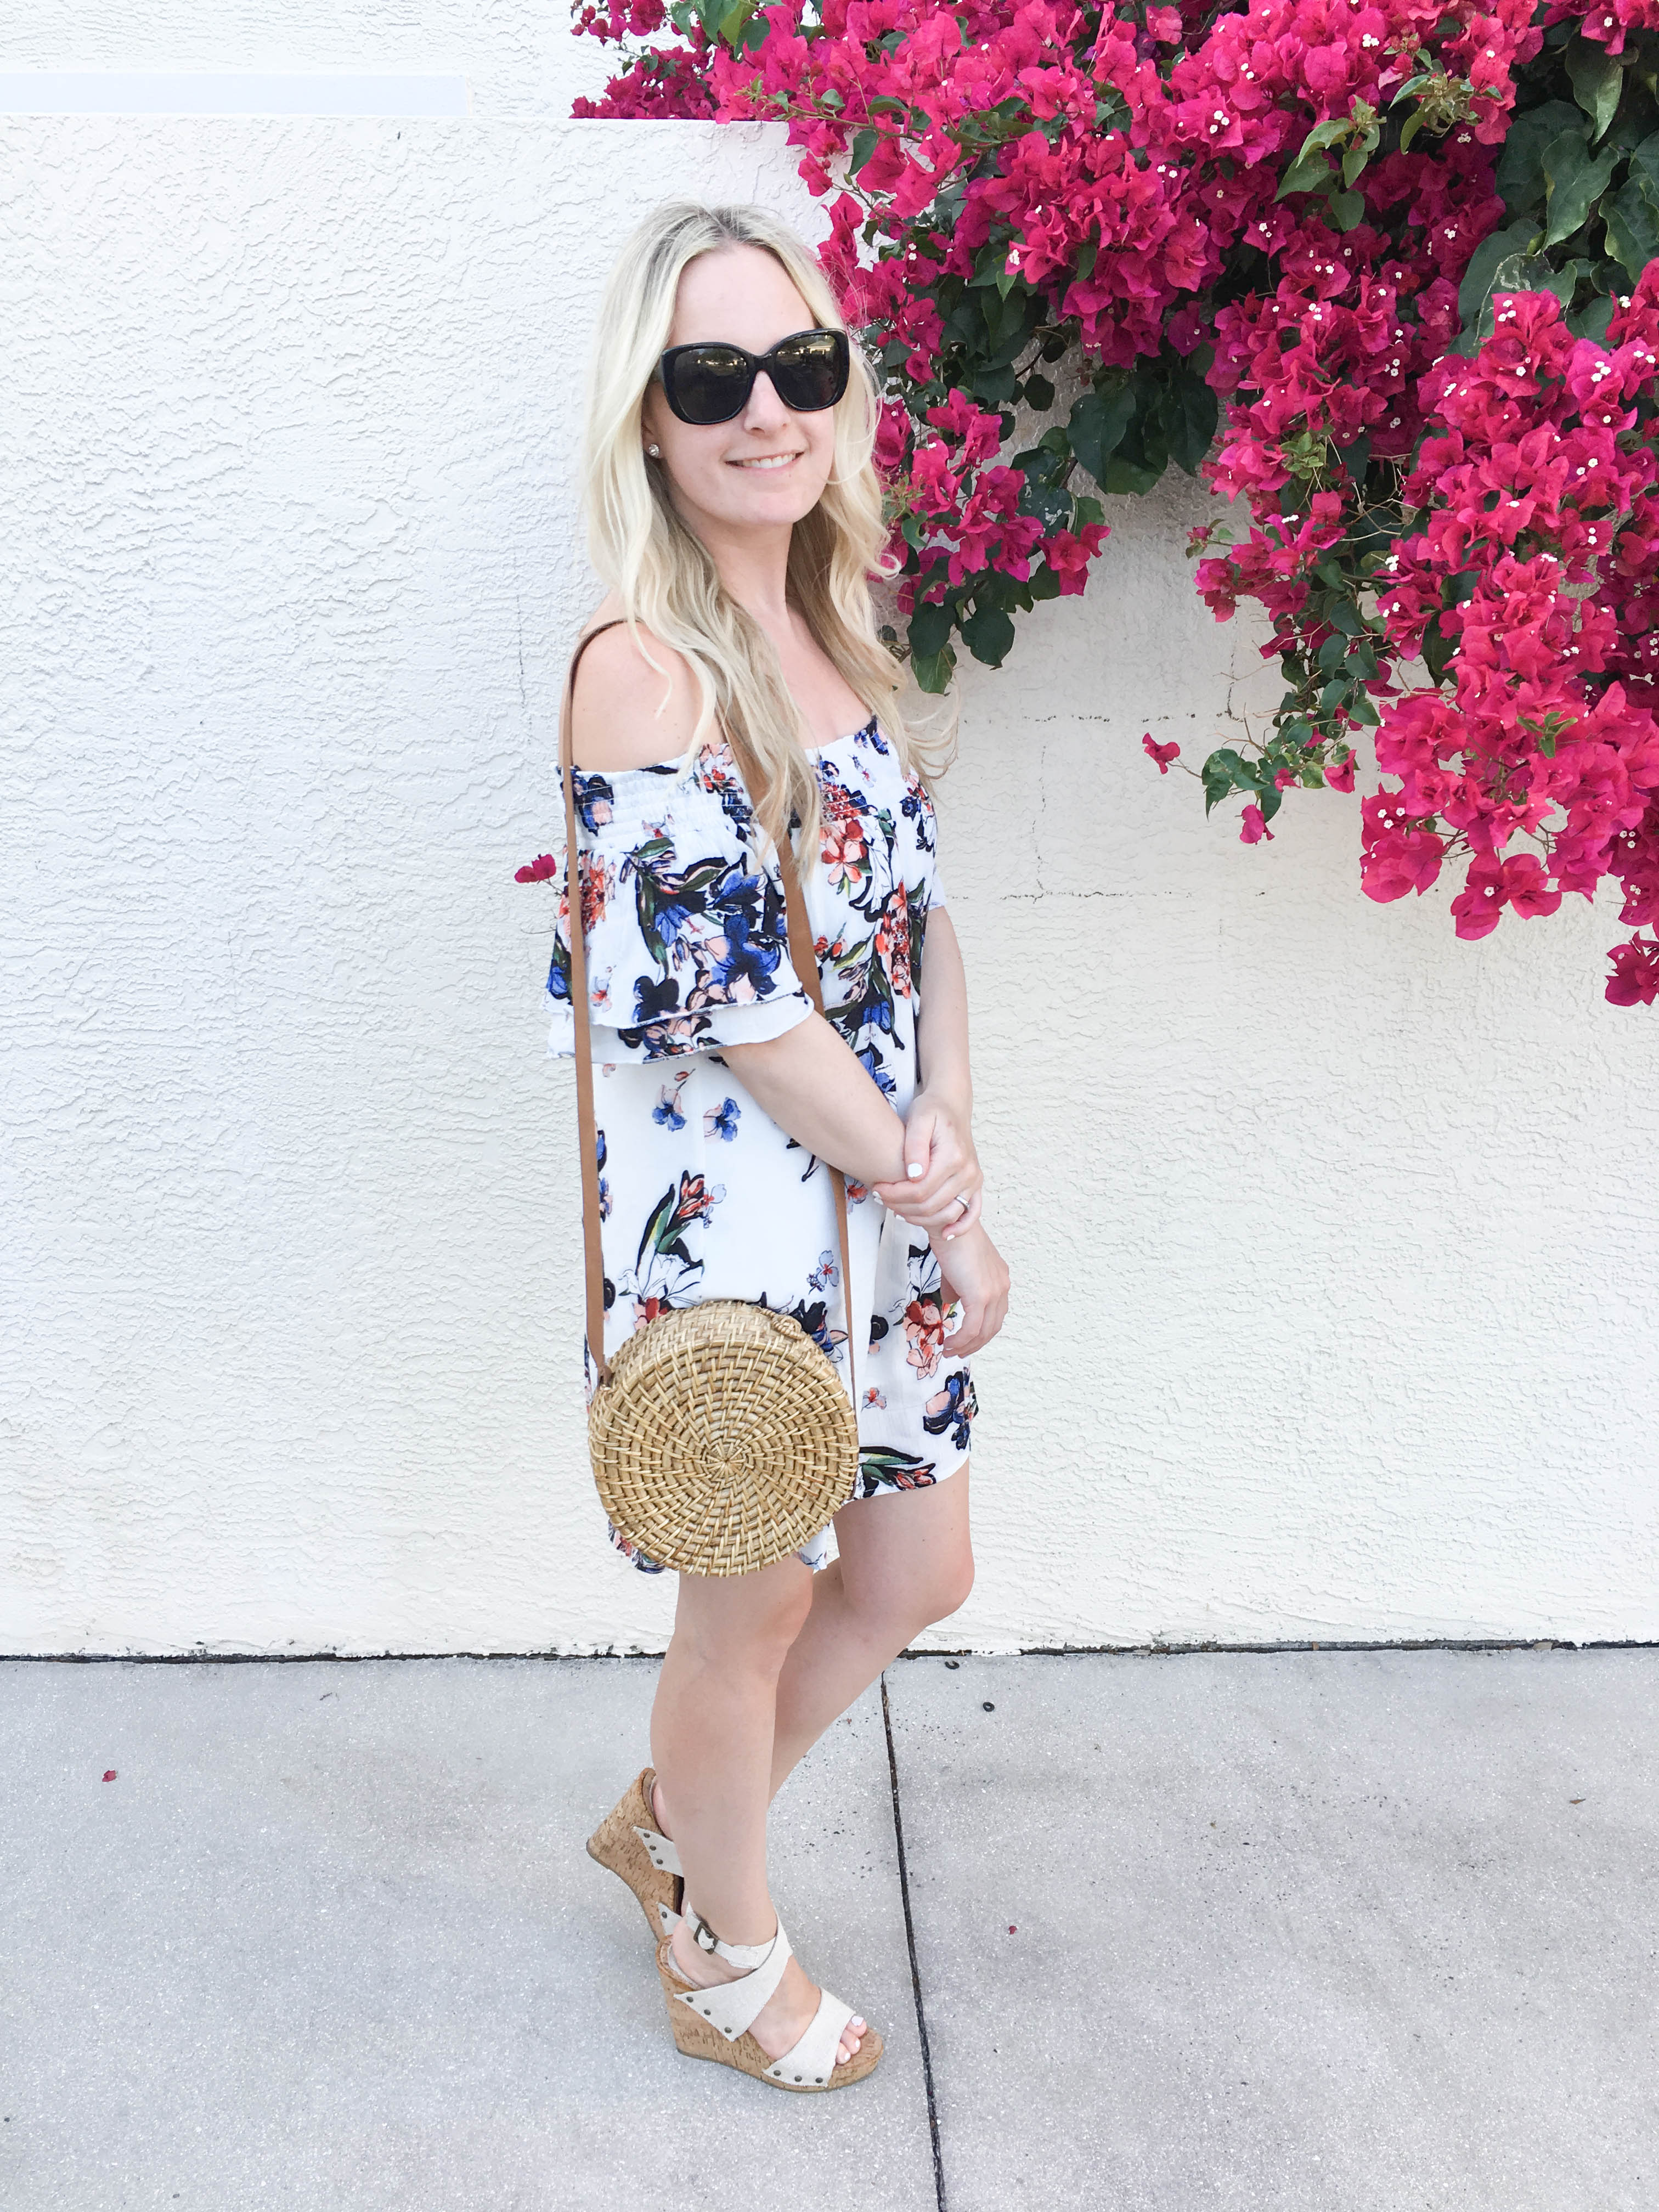 Floral Off the shoulder dress on livin' life with style